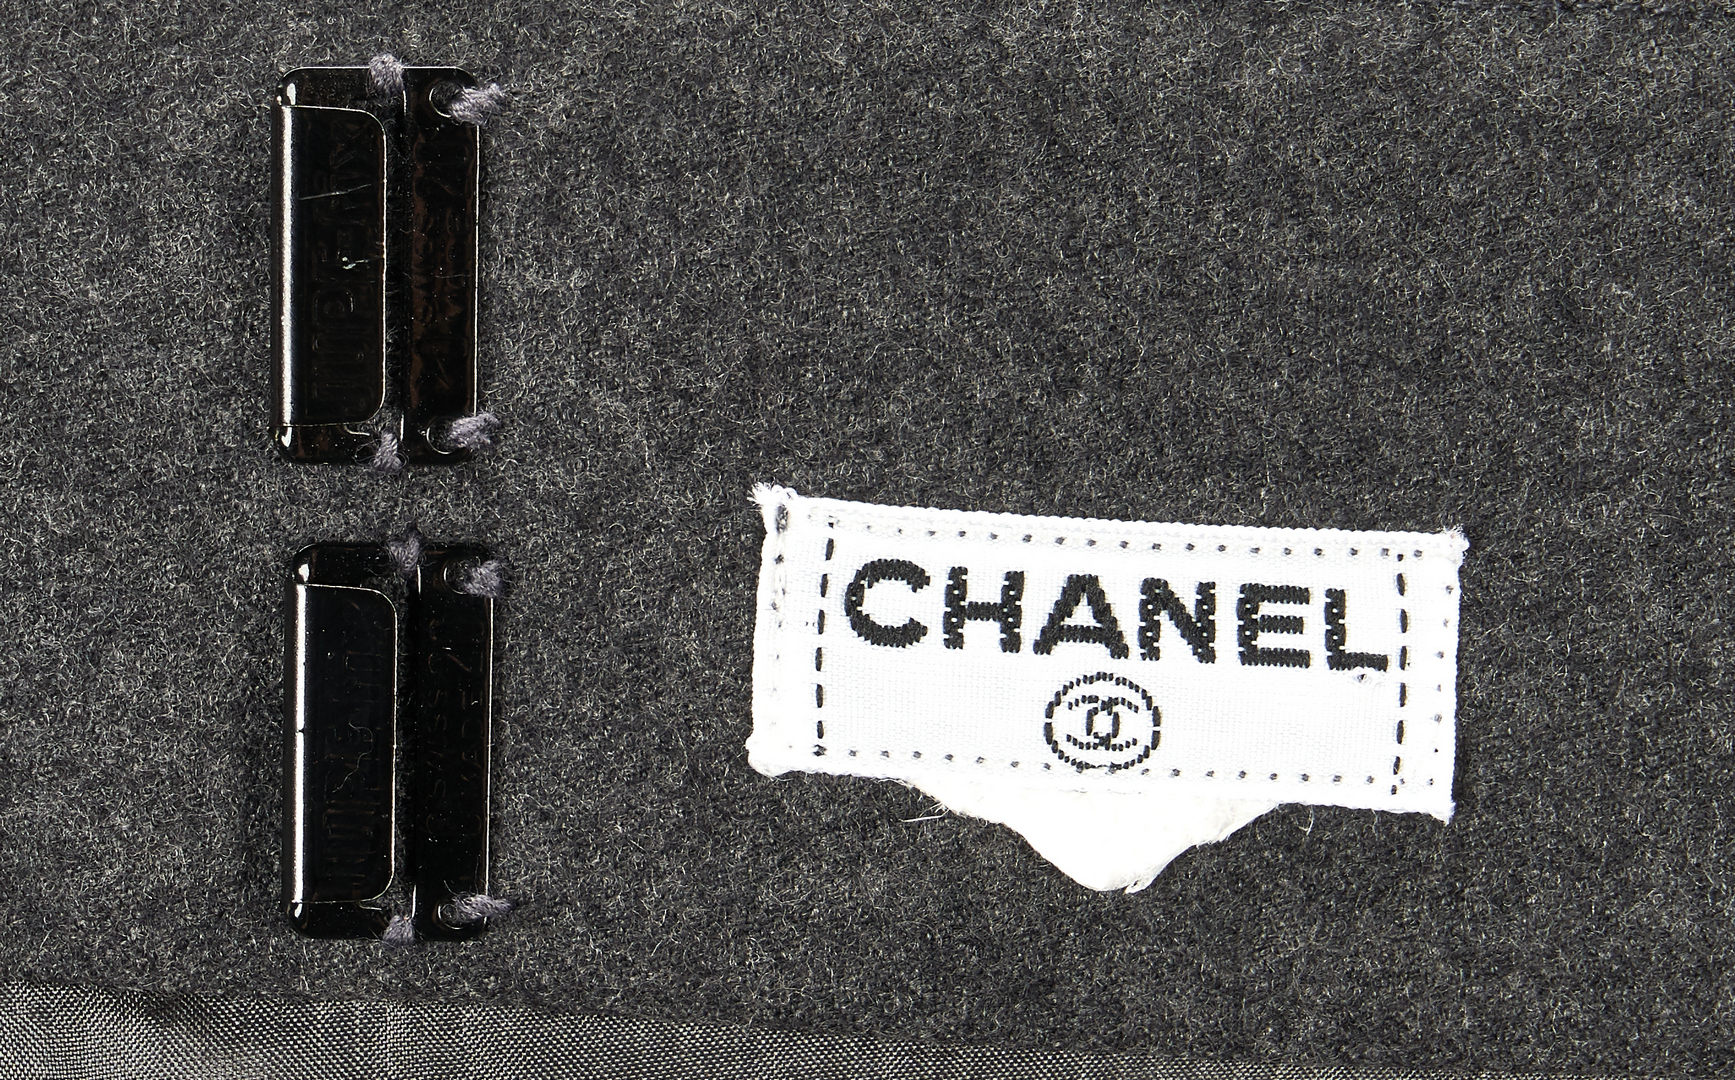 Lot 713: 6 Chanel Designer Items, incl. Skirts/Blouses